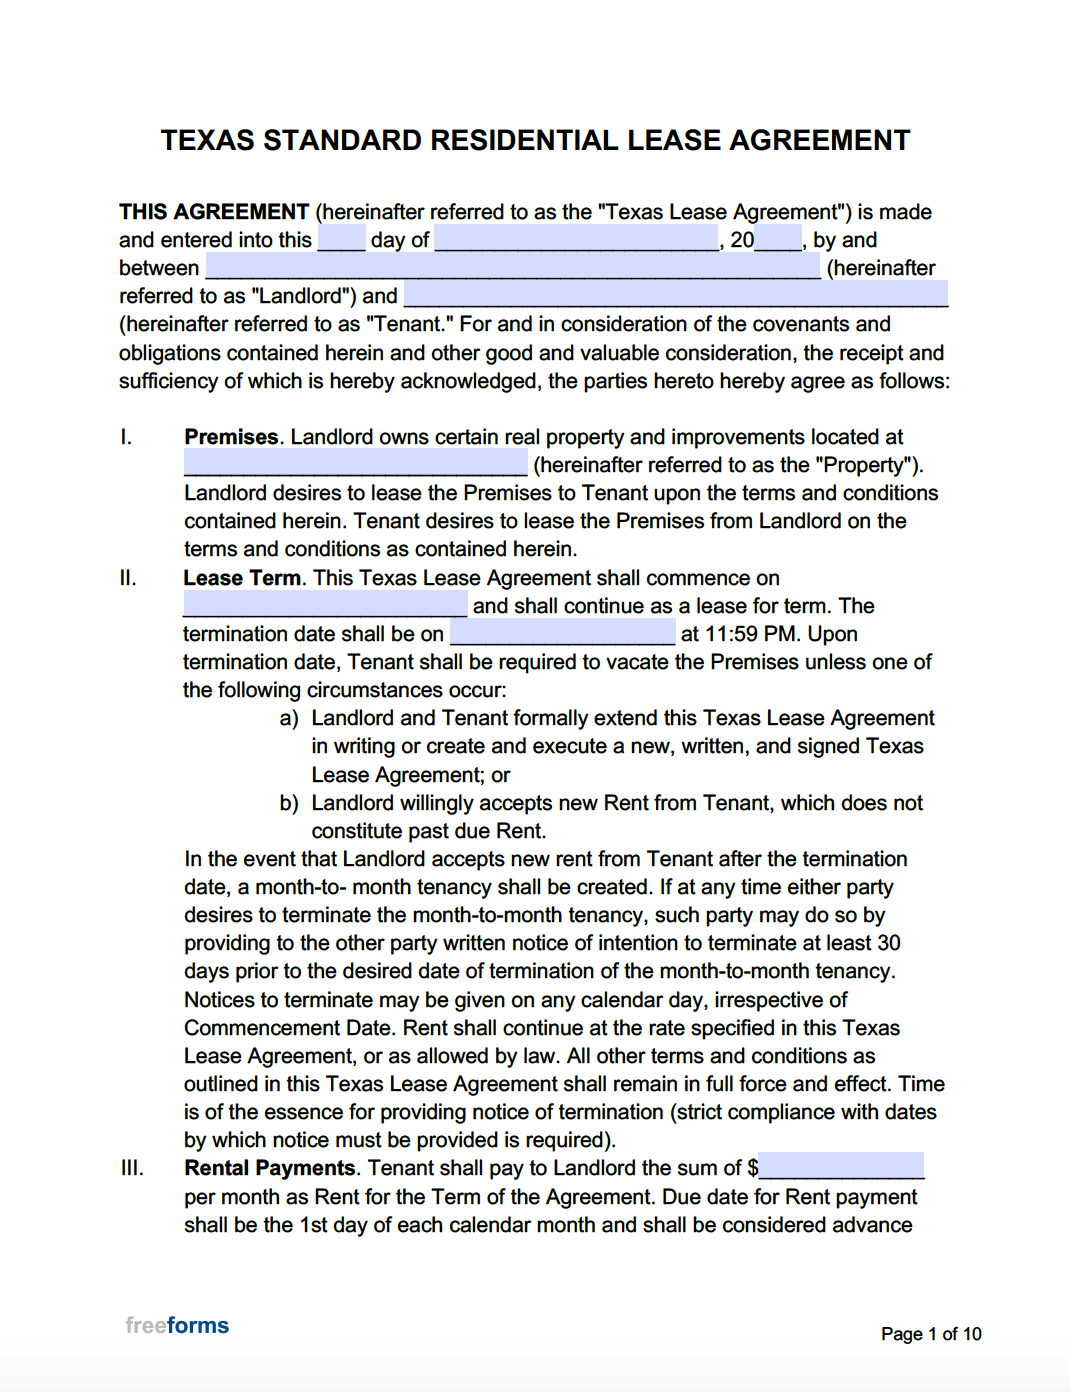 Free Texas Standard Residential Lease Agreement Template | PDF | WORD